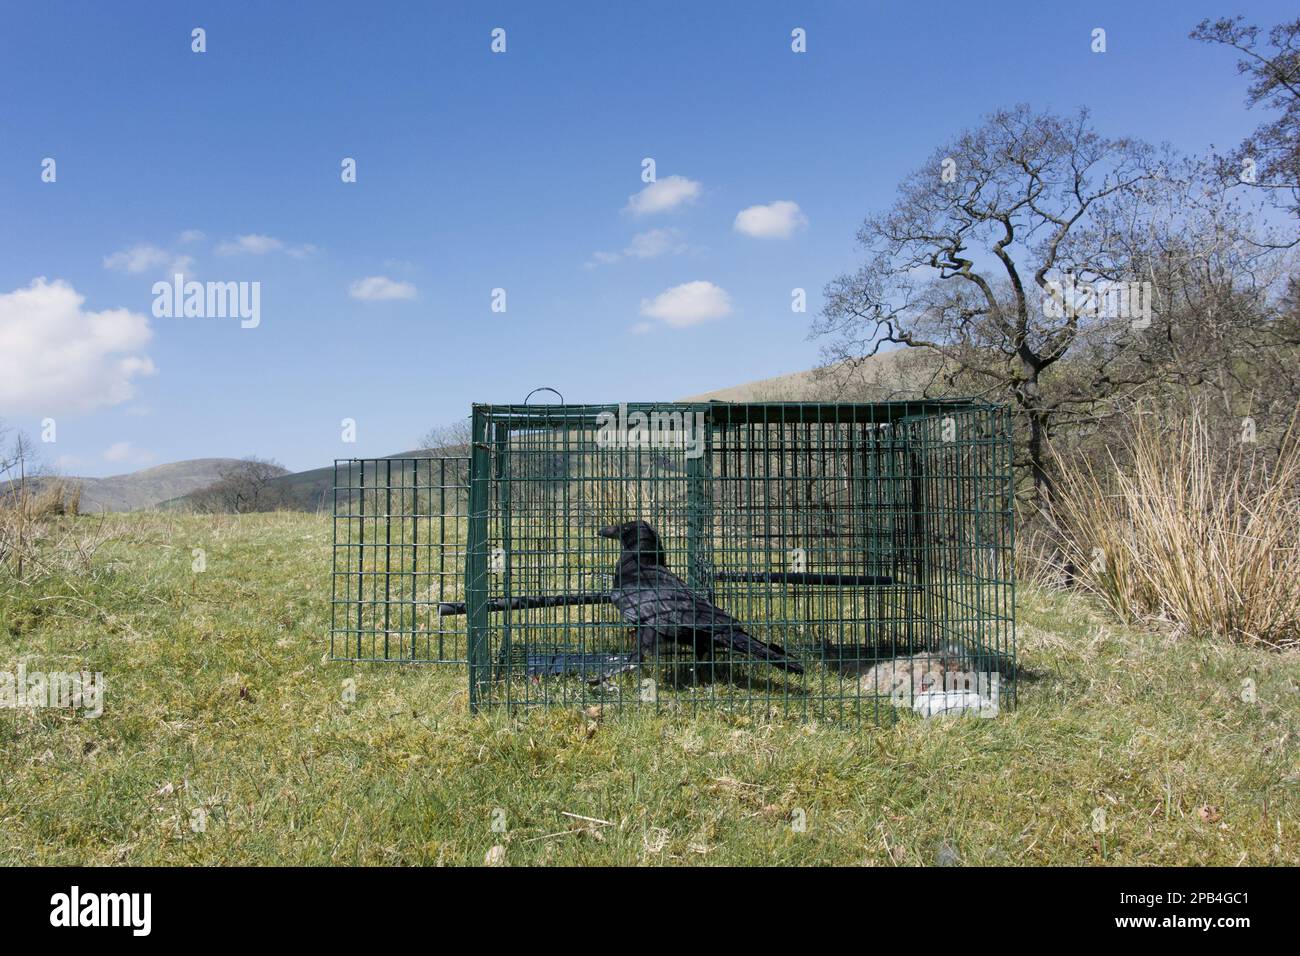 Carrion Crow (Corvus corone) adult, caught in larsen trap, used to control crow population in countryside, Cumbria, England, United Kingdom, Europe Stock Photo